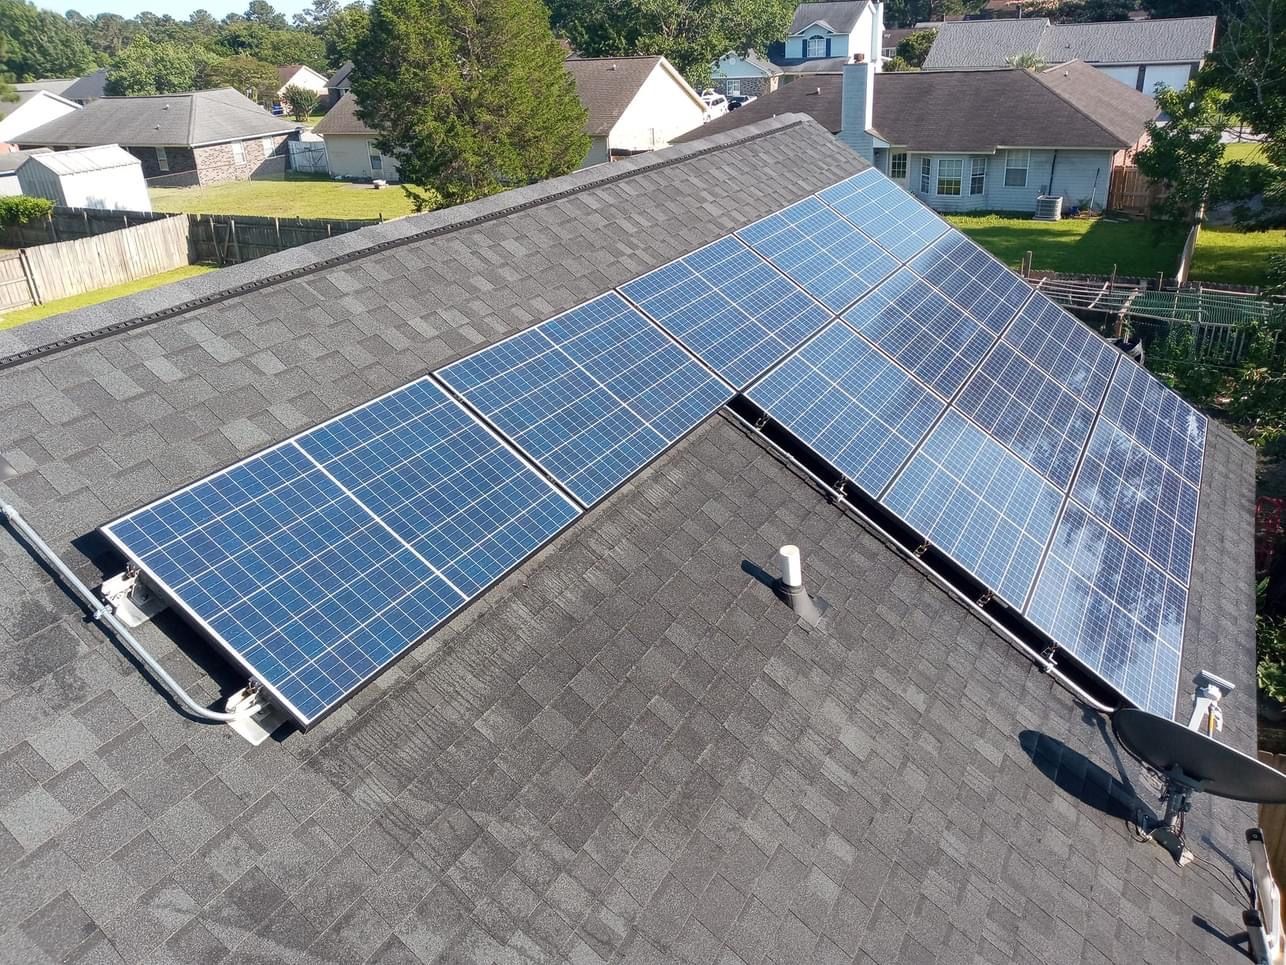 Sparkling clean solar panels after professional cleaning service in Placentia, Orange County